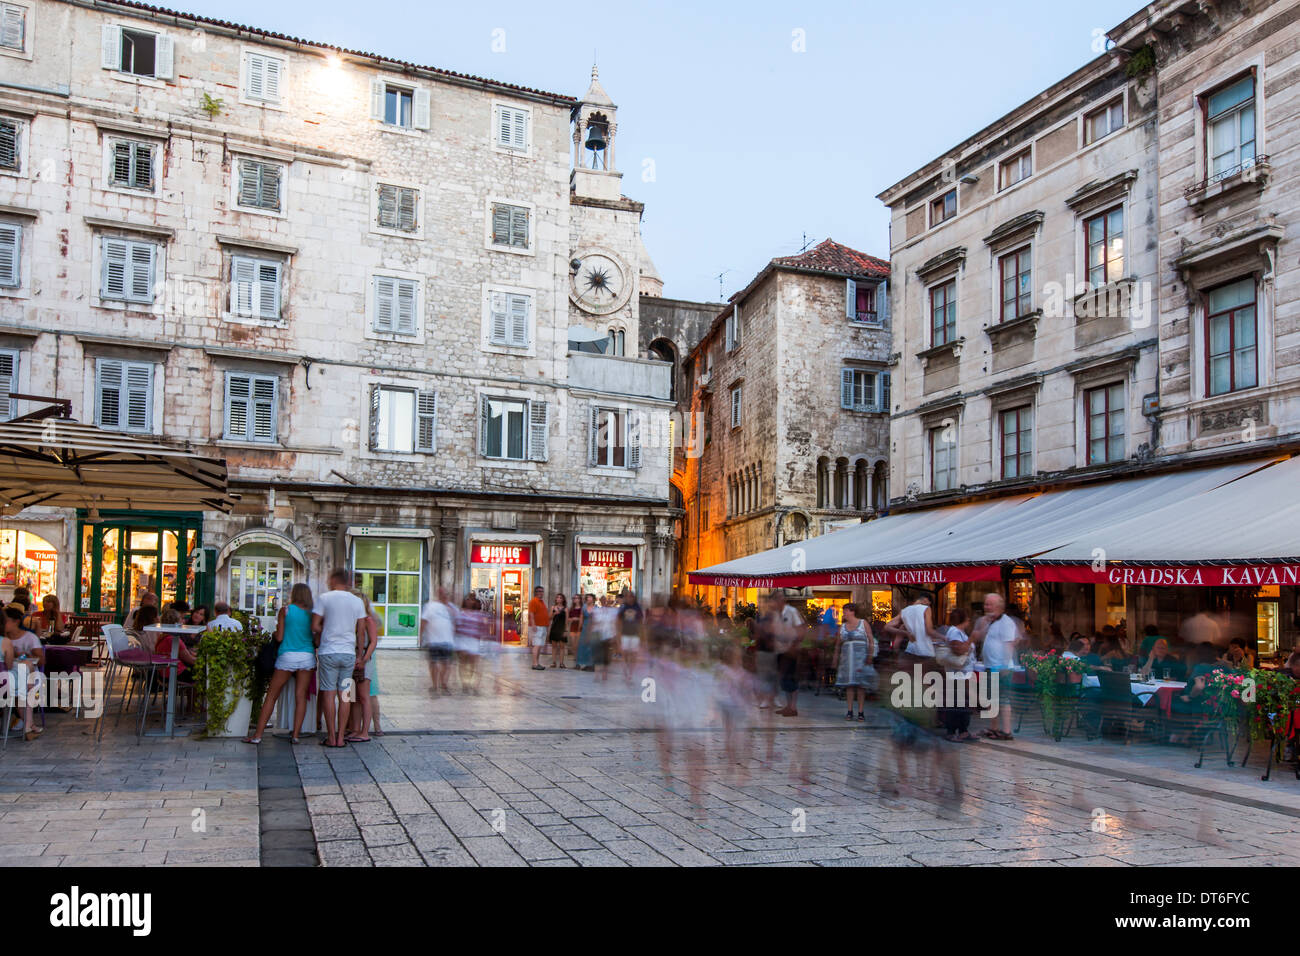 Place in the city center with restaurants and terraces filled with people having dinner Stock Photo